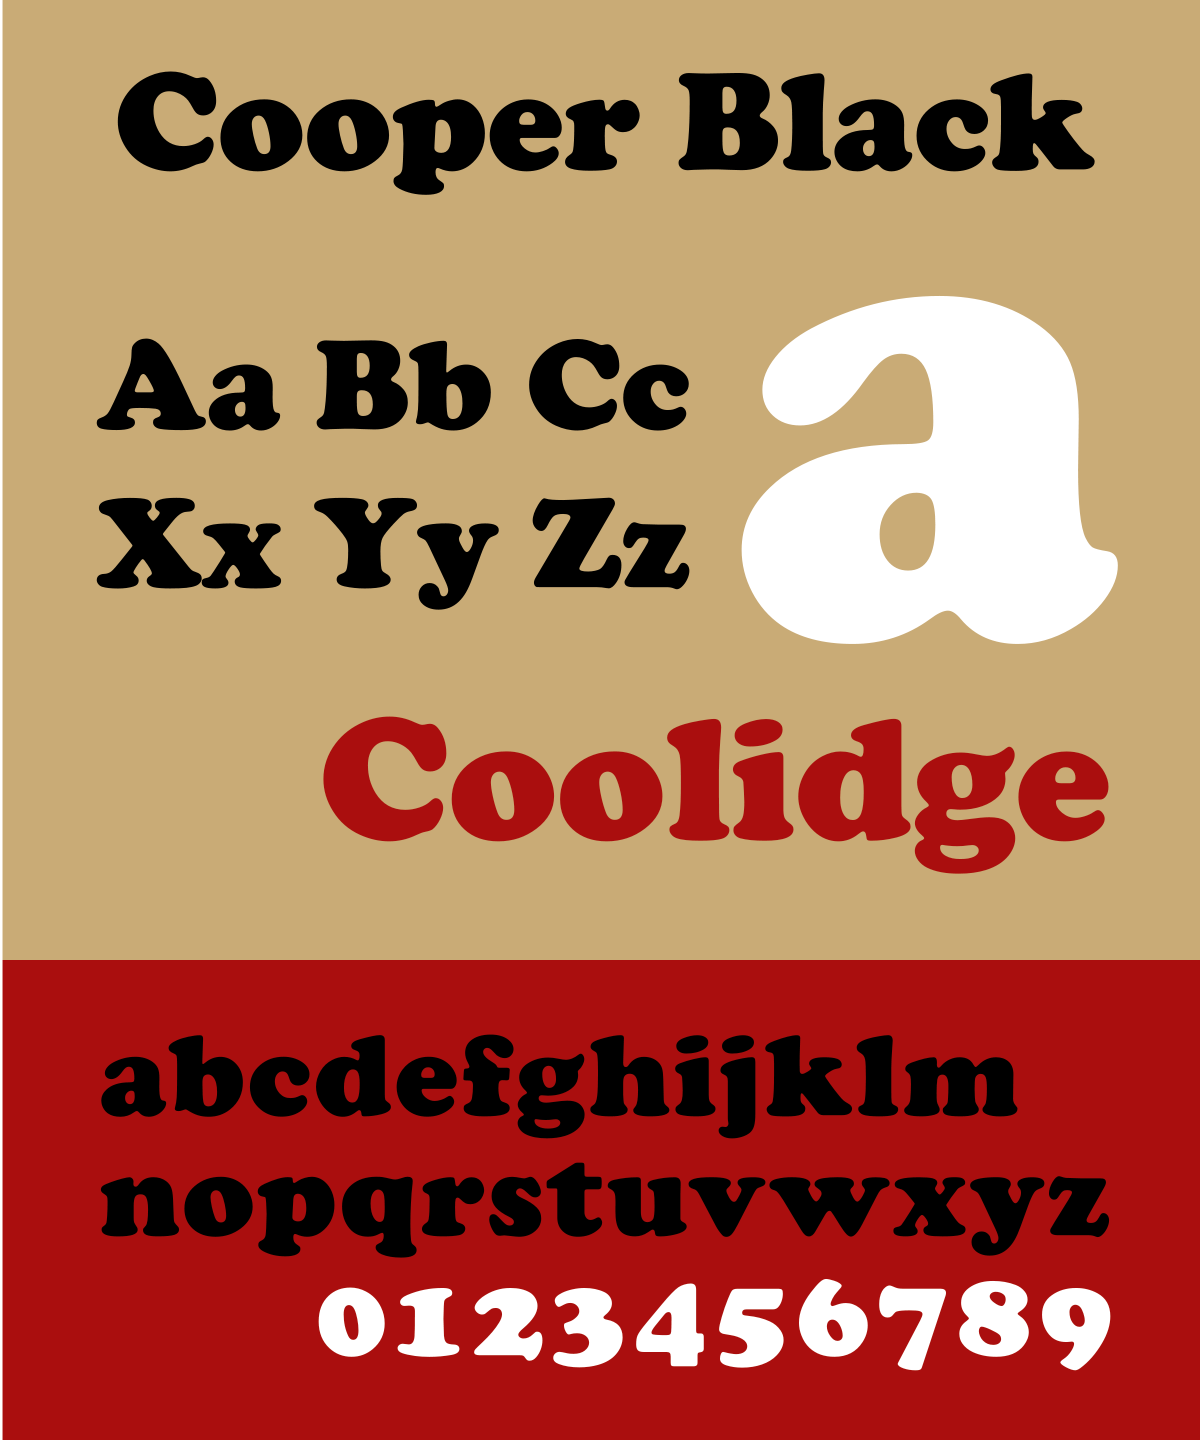 Img: Cooper Black is a typeface released by the Barnhart Brothers & Spindler type foundry in 1922. 